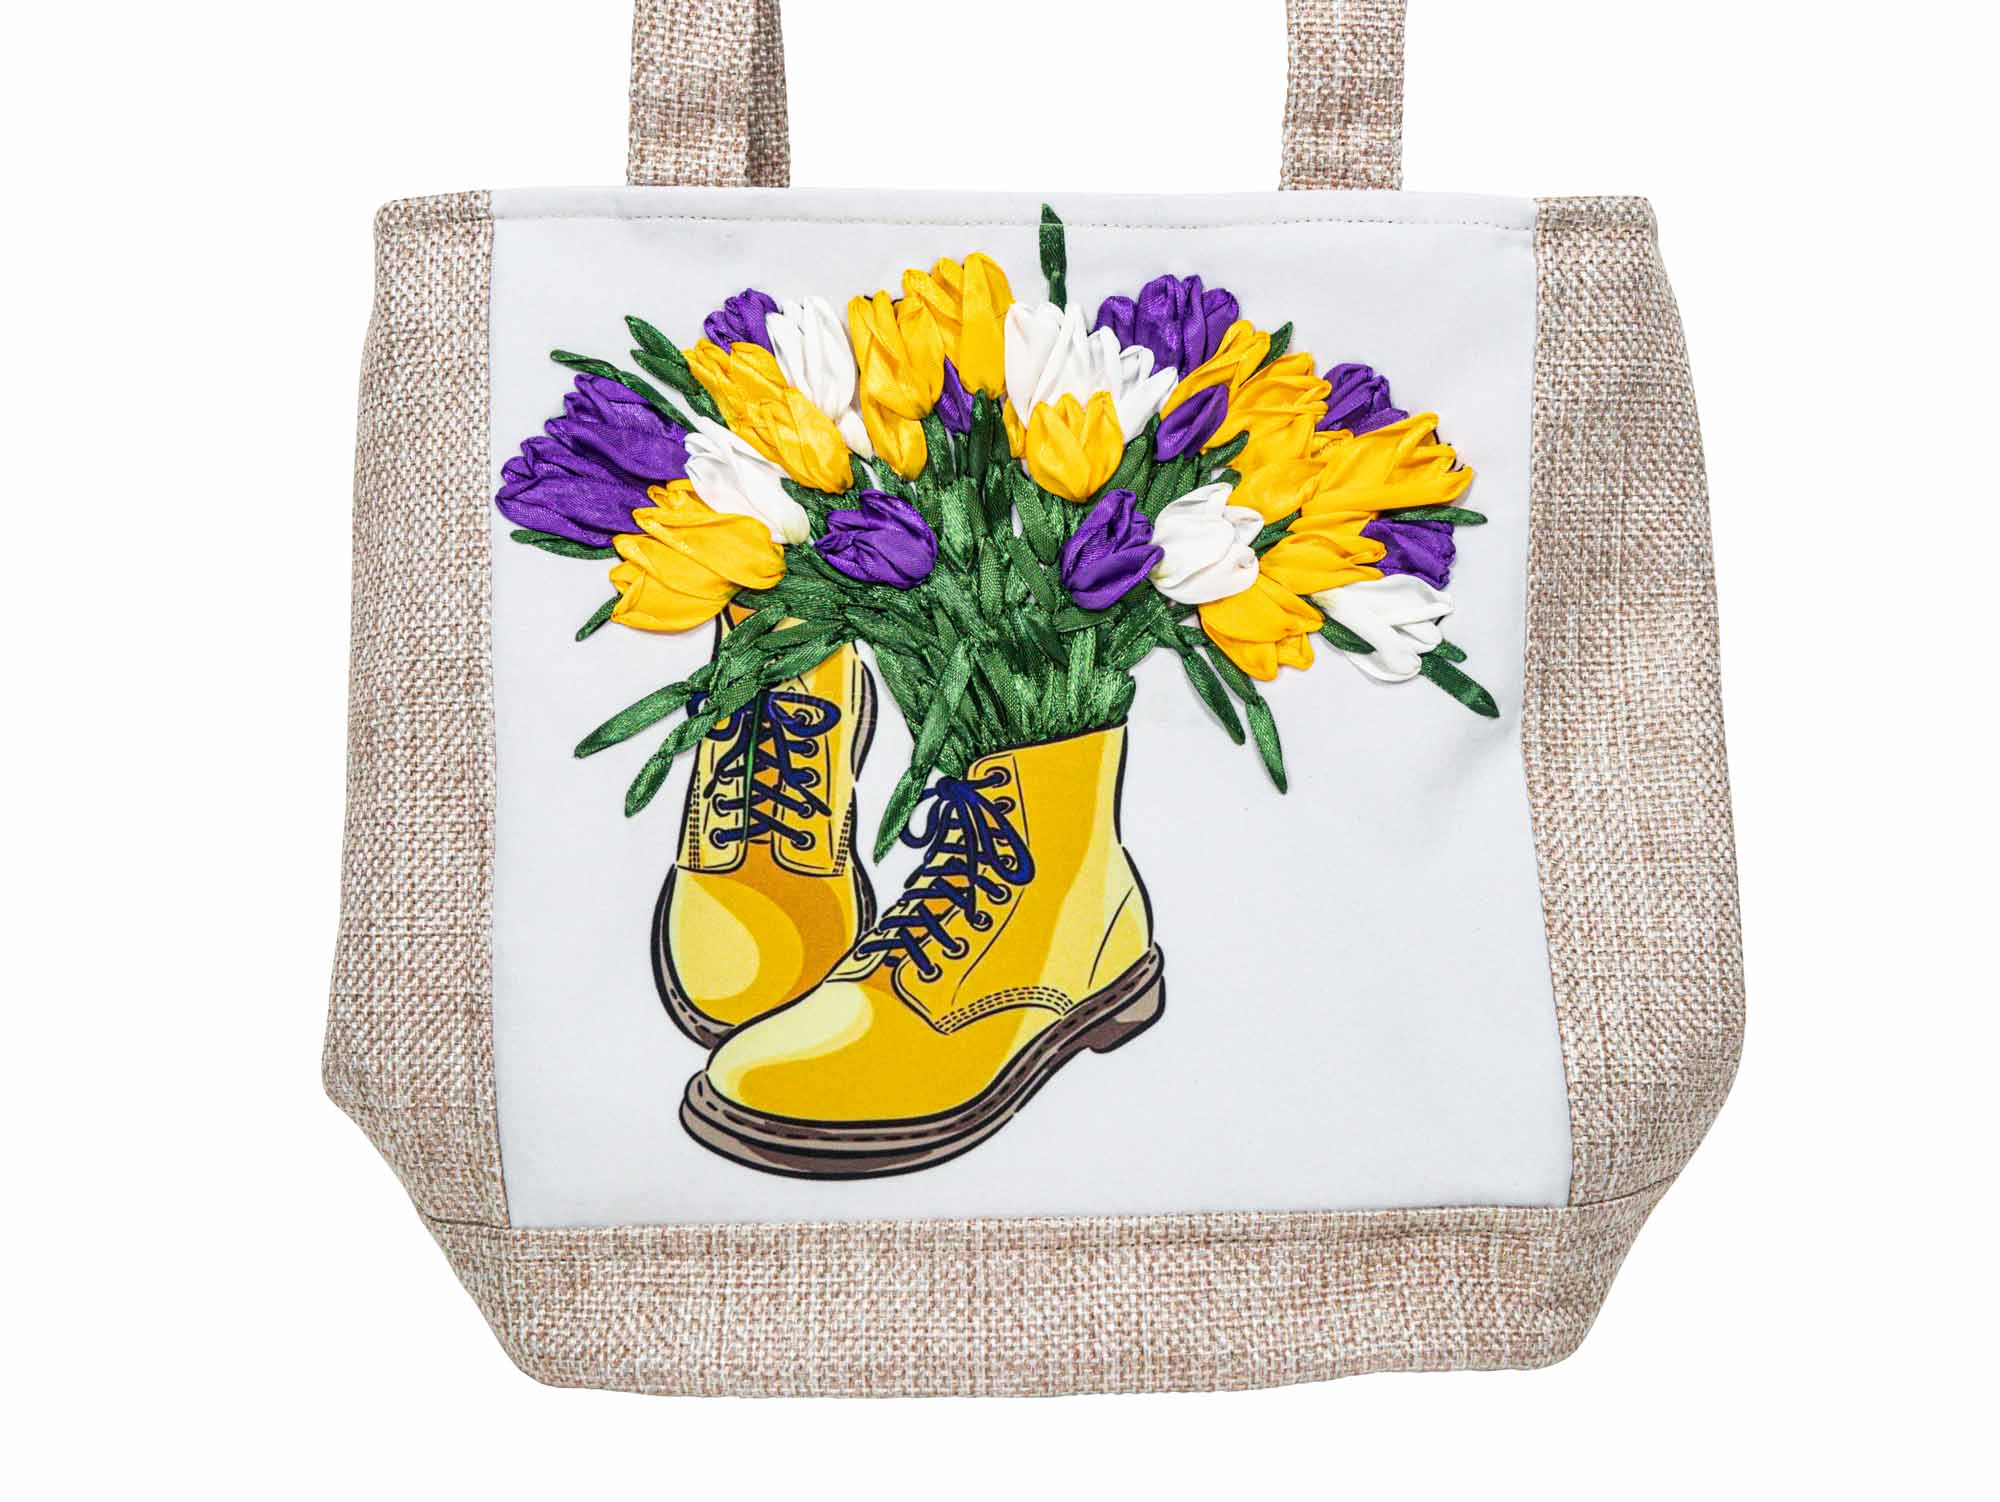 Hand Embroidered Burlap Tote Bag: Gallery Item - 1379-30-G4968 (9UL8)